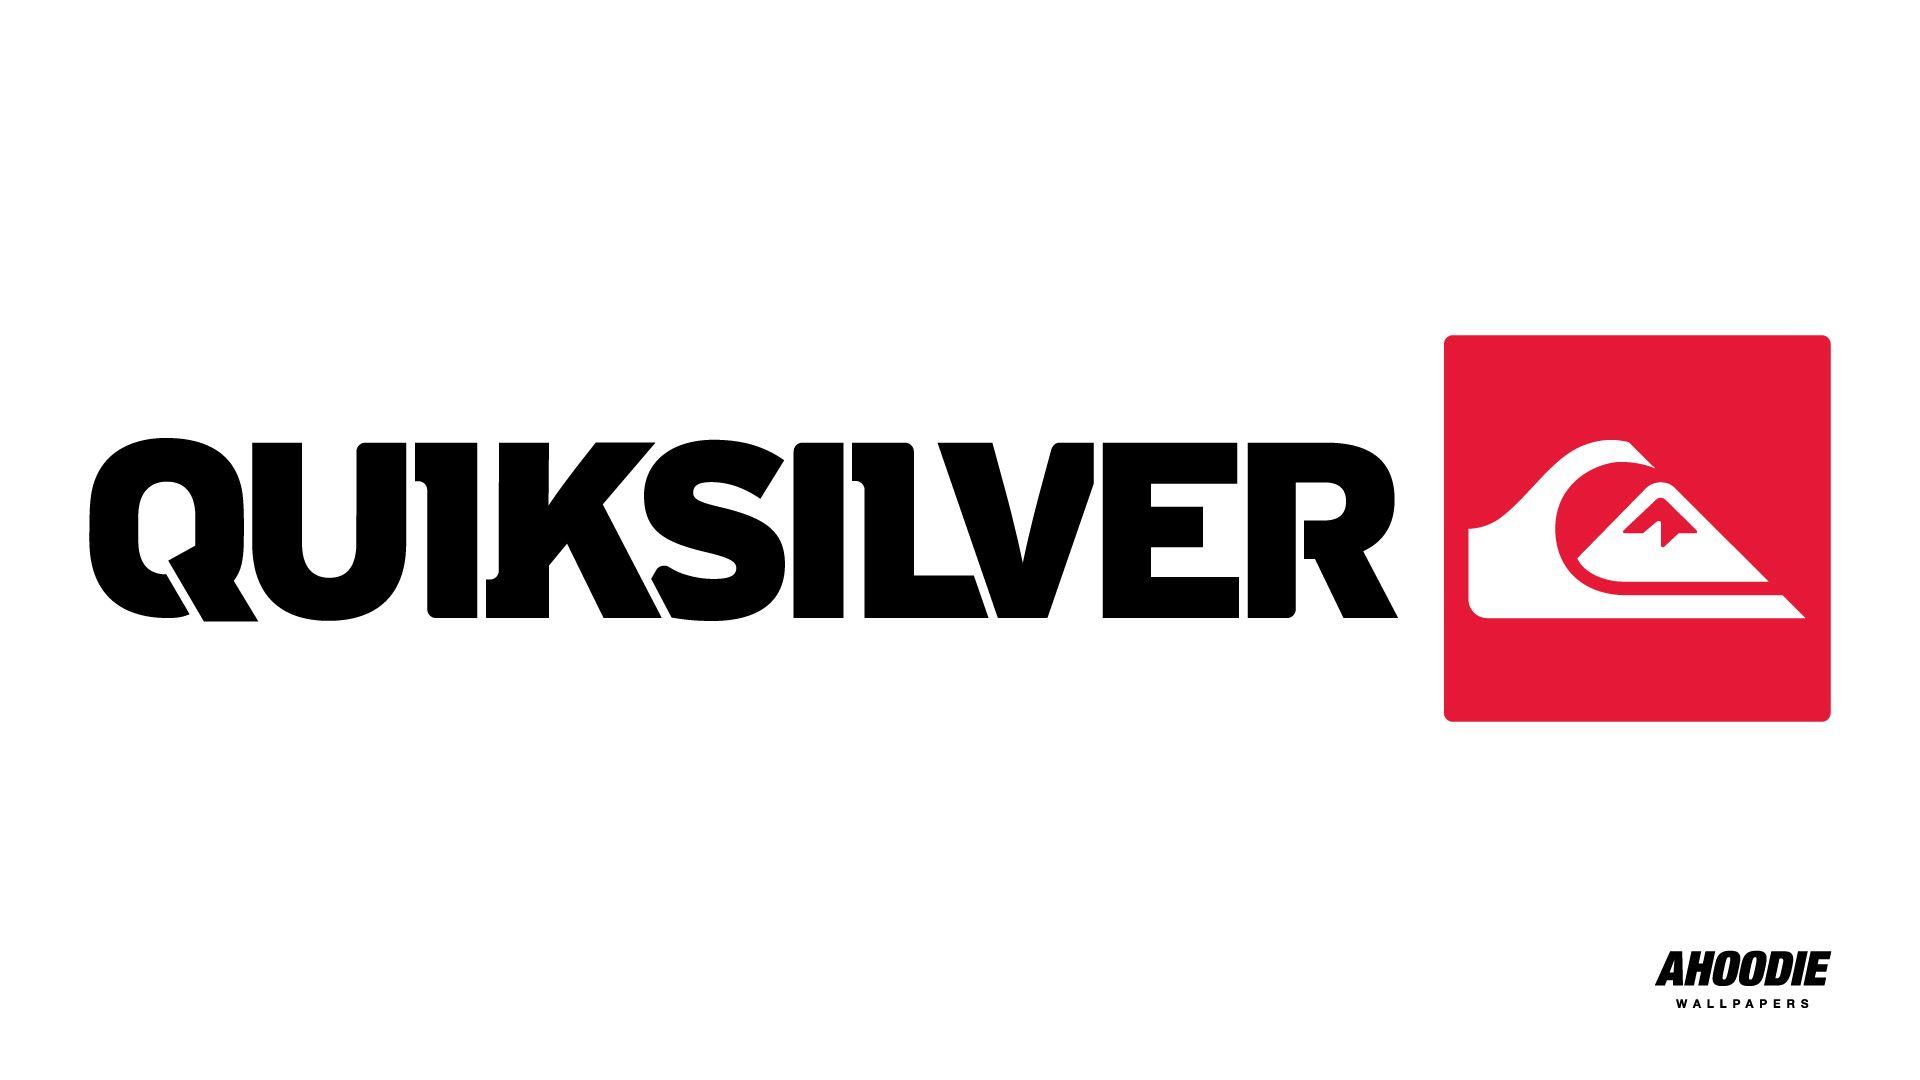 The Quiksilver logo's typography is appropriate for its